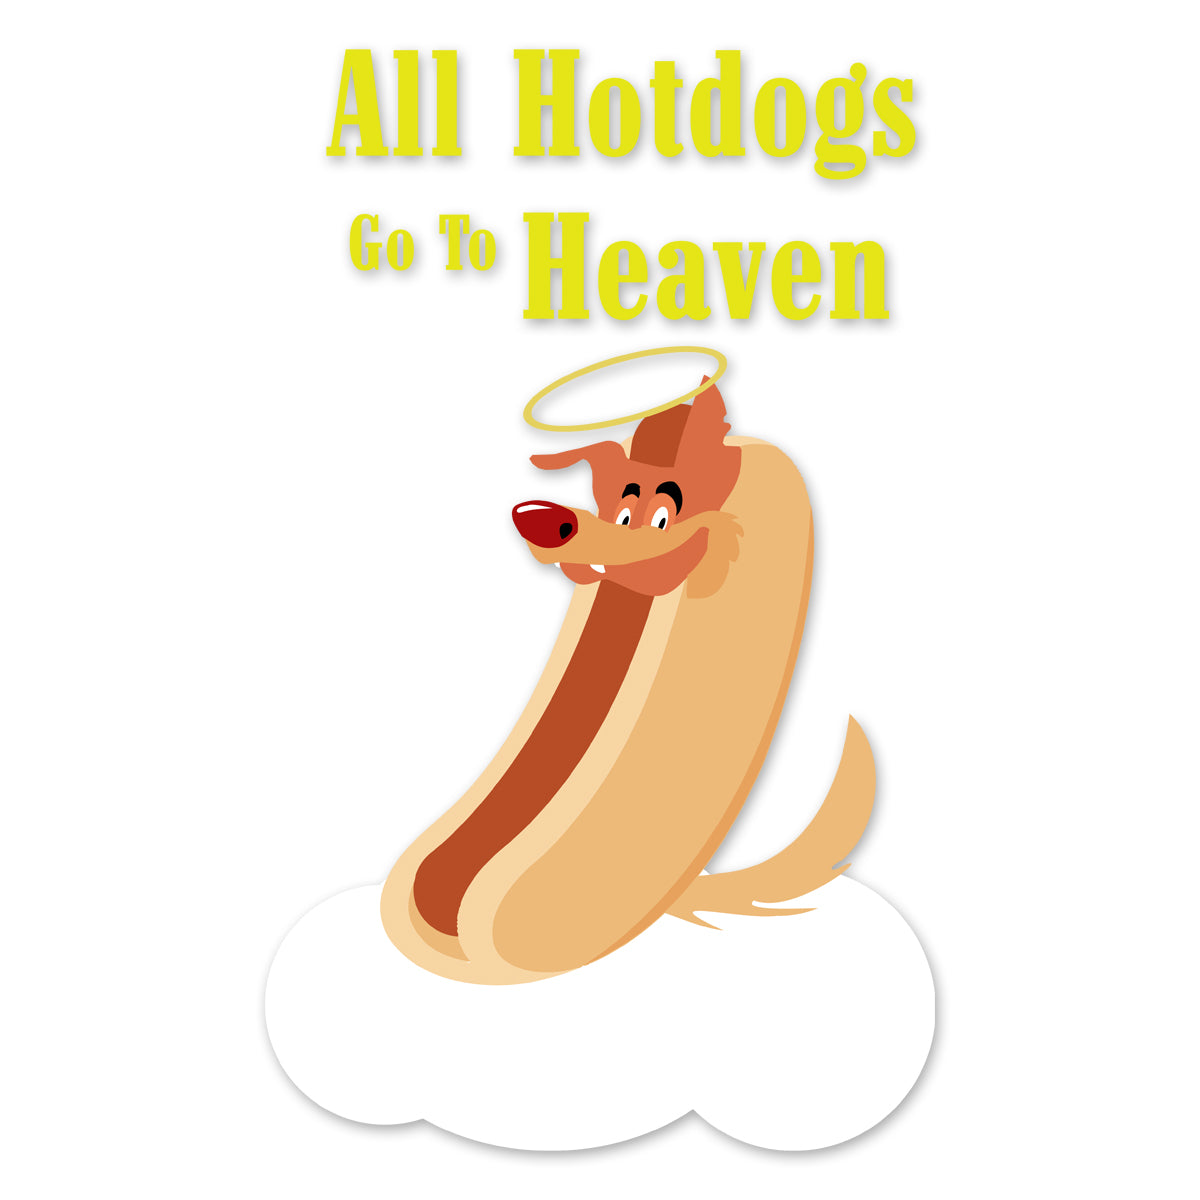 Movie The Food - All Hotdogs Go To Heaven Kid's T-Shirt - Royal Blue - Design Detail